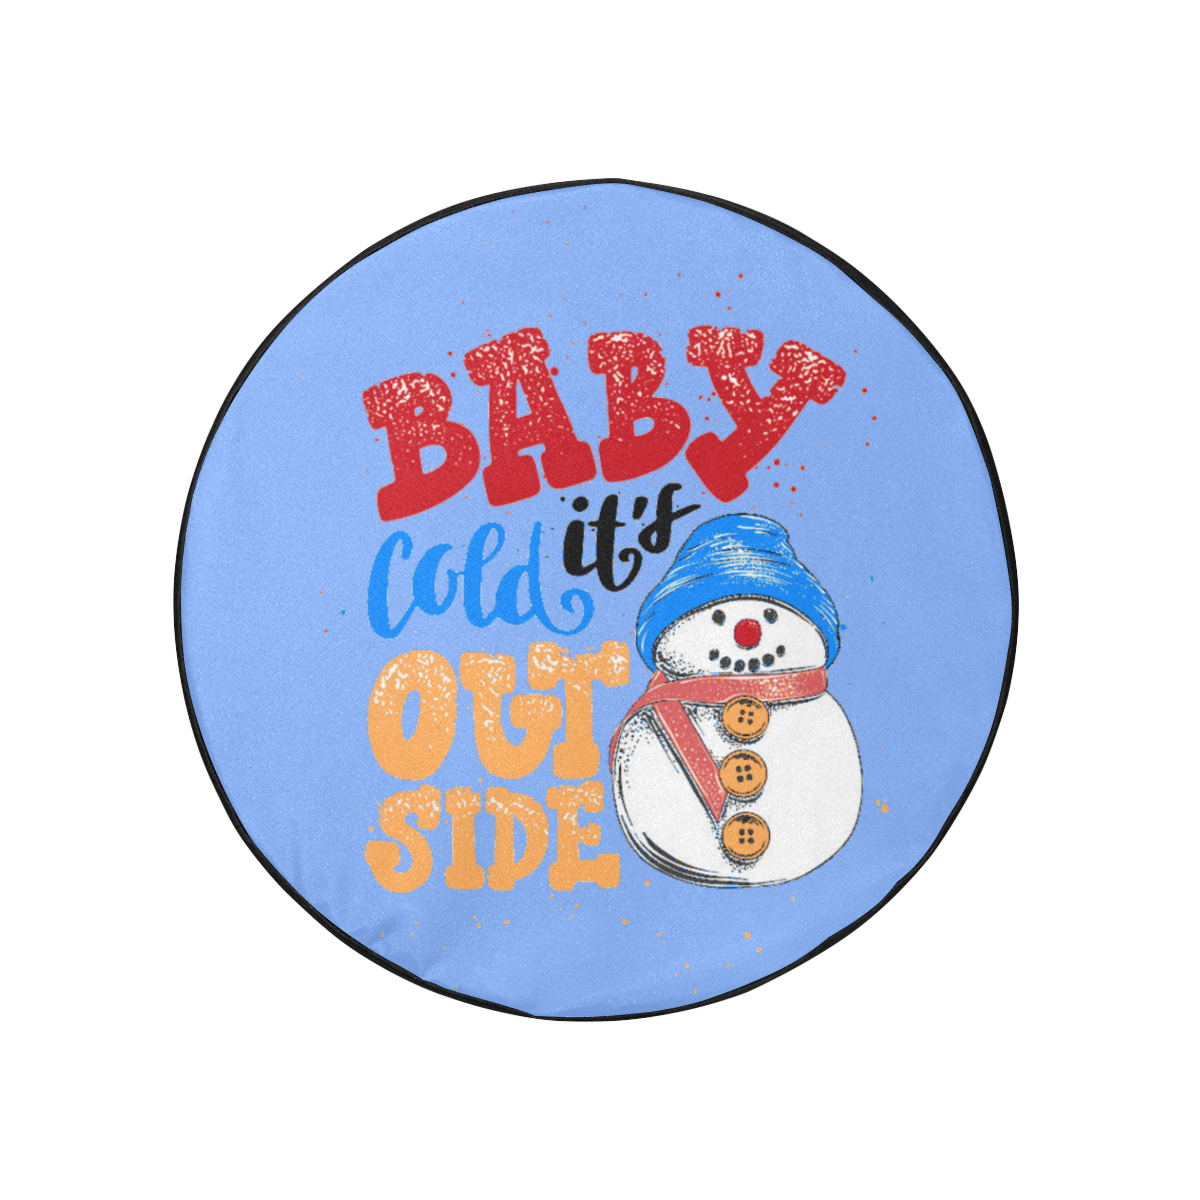 Baby It's Cold Outside Snowman 32 Inch Spare Tire Cover